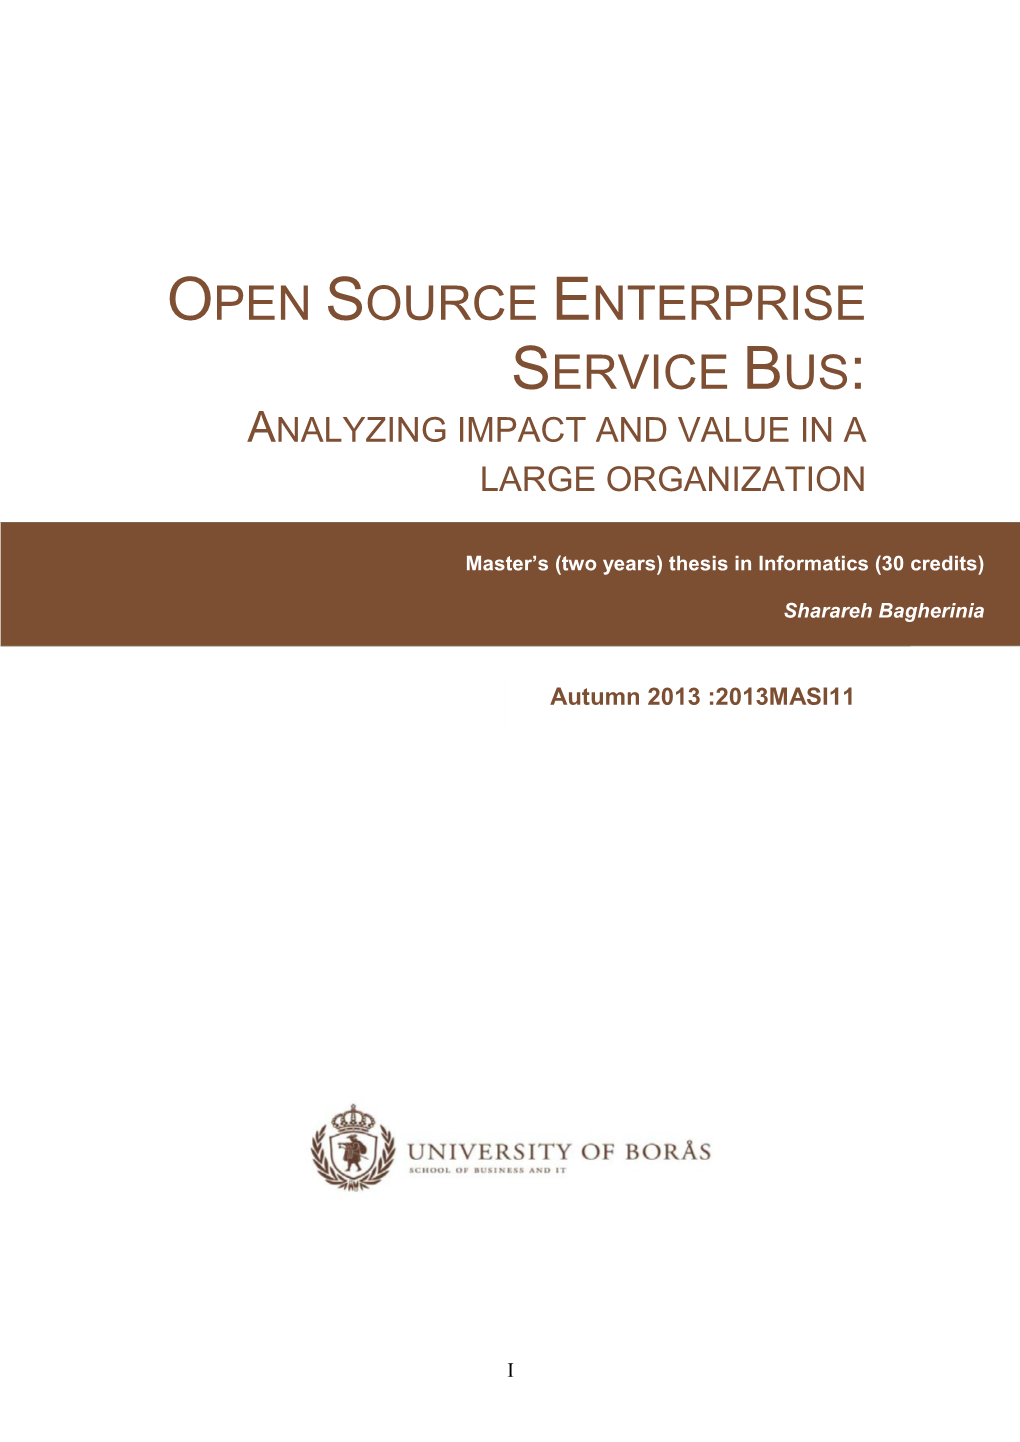 Open Source Enterprise Service Bus: Analyzing Impact and Value in a Large Organization